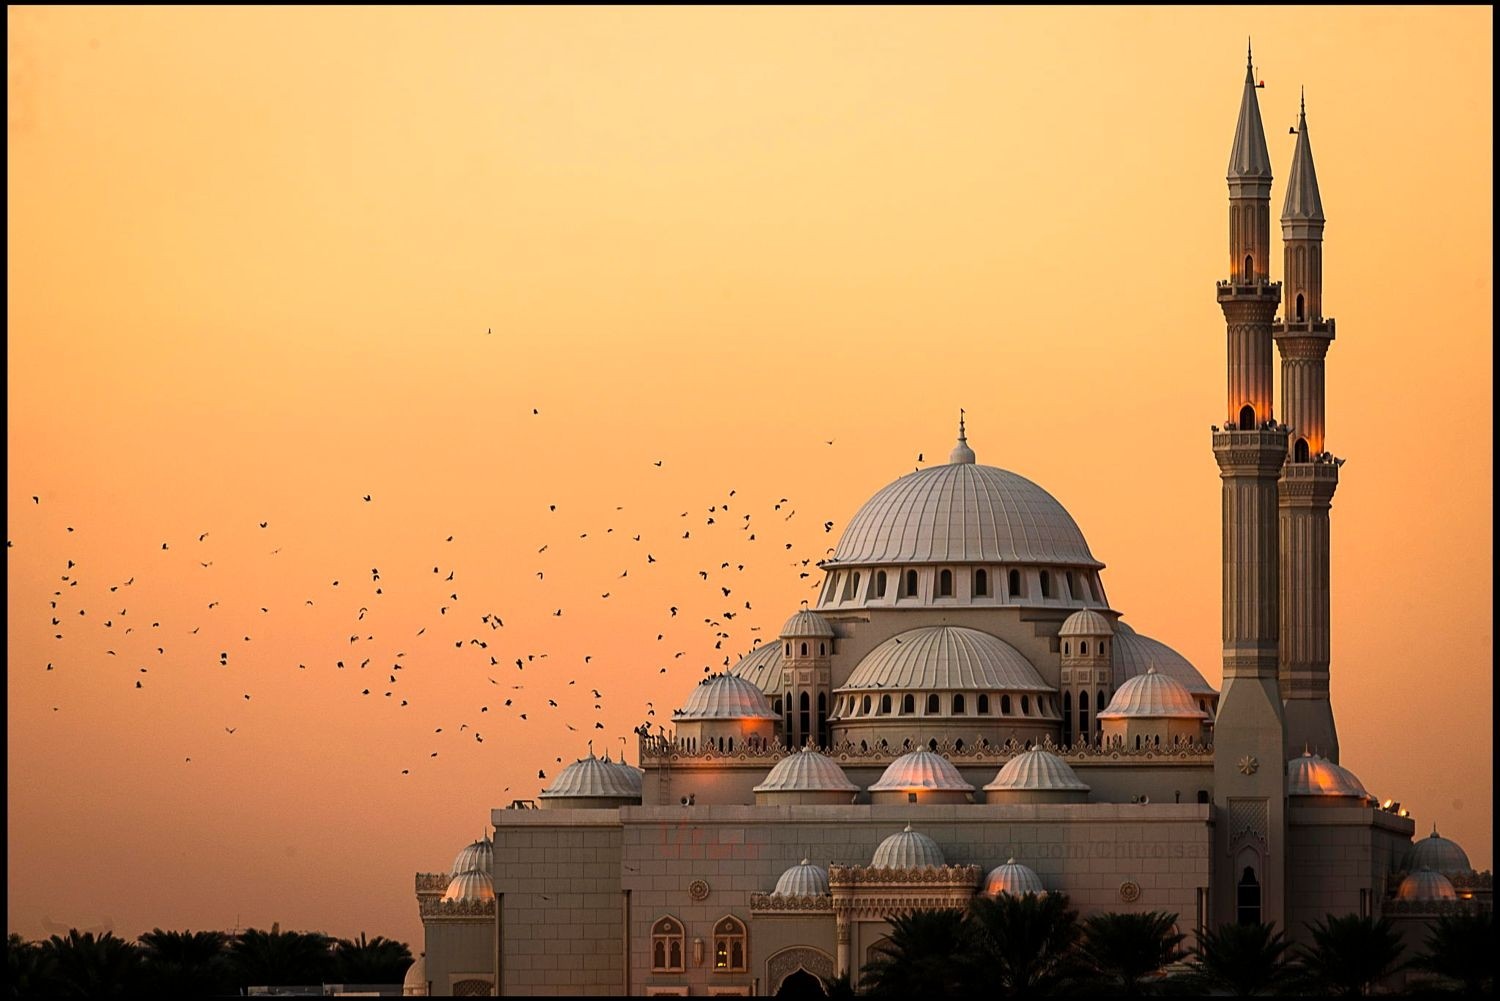 photography, Nature, Landscape, Mosque, Architecture, Islam, Flying, Birds, Sunset, Lights, Religion, India Wallpaper